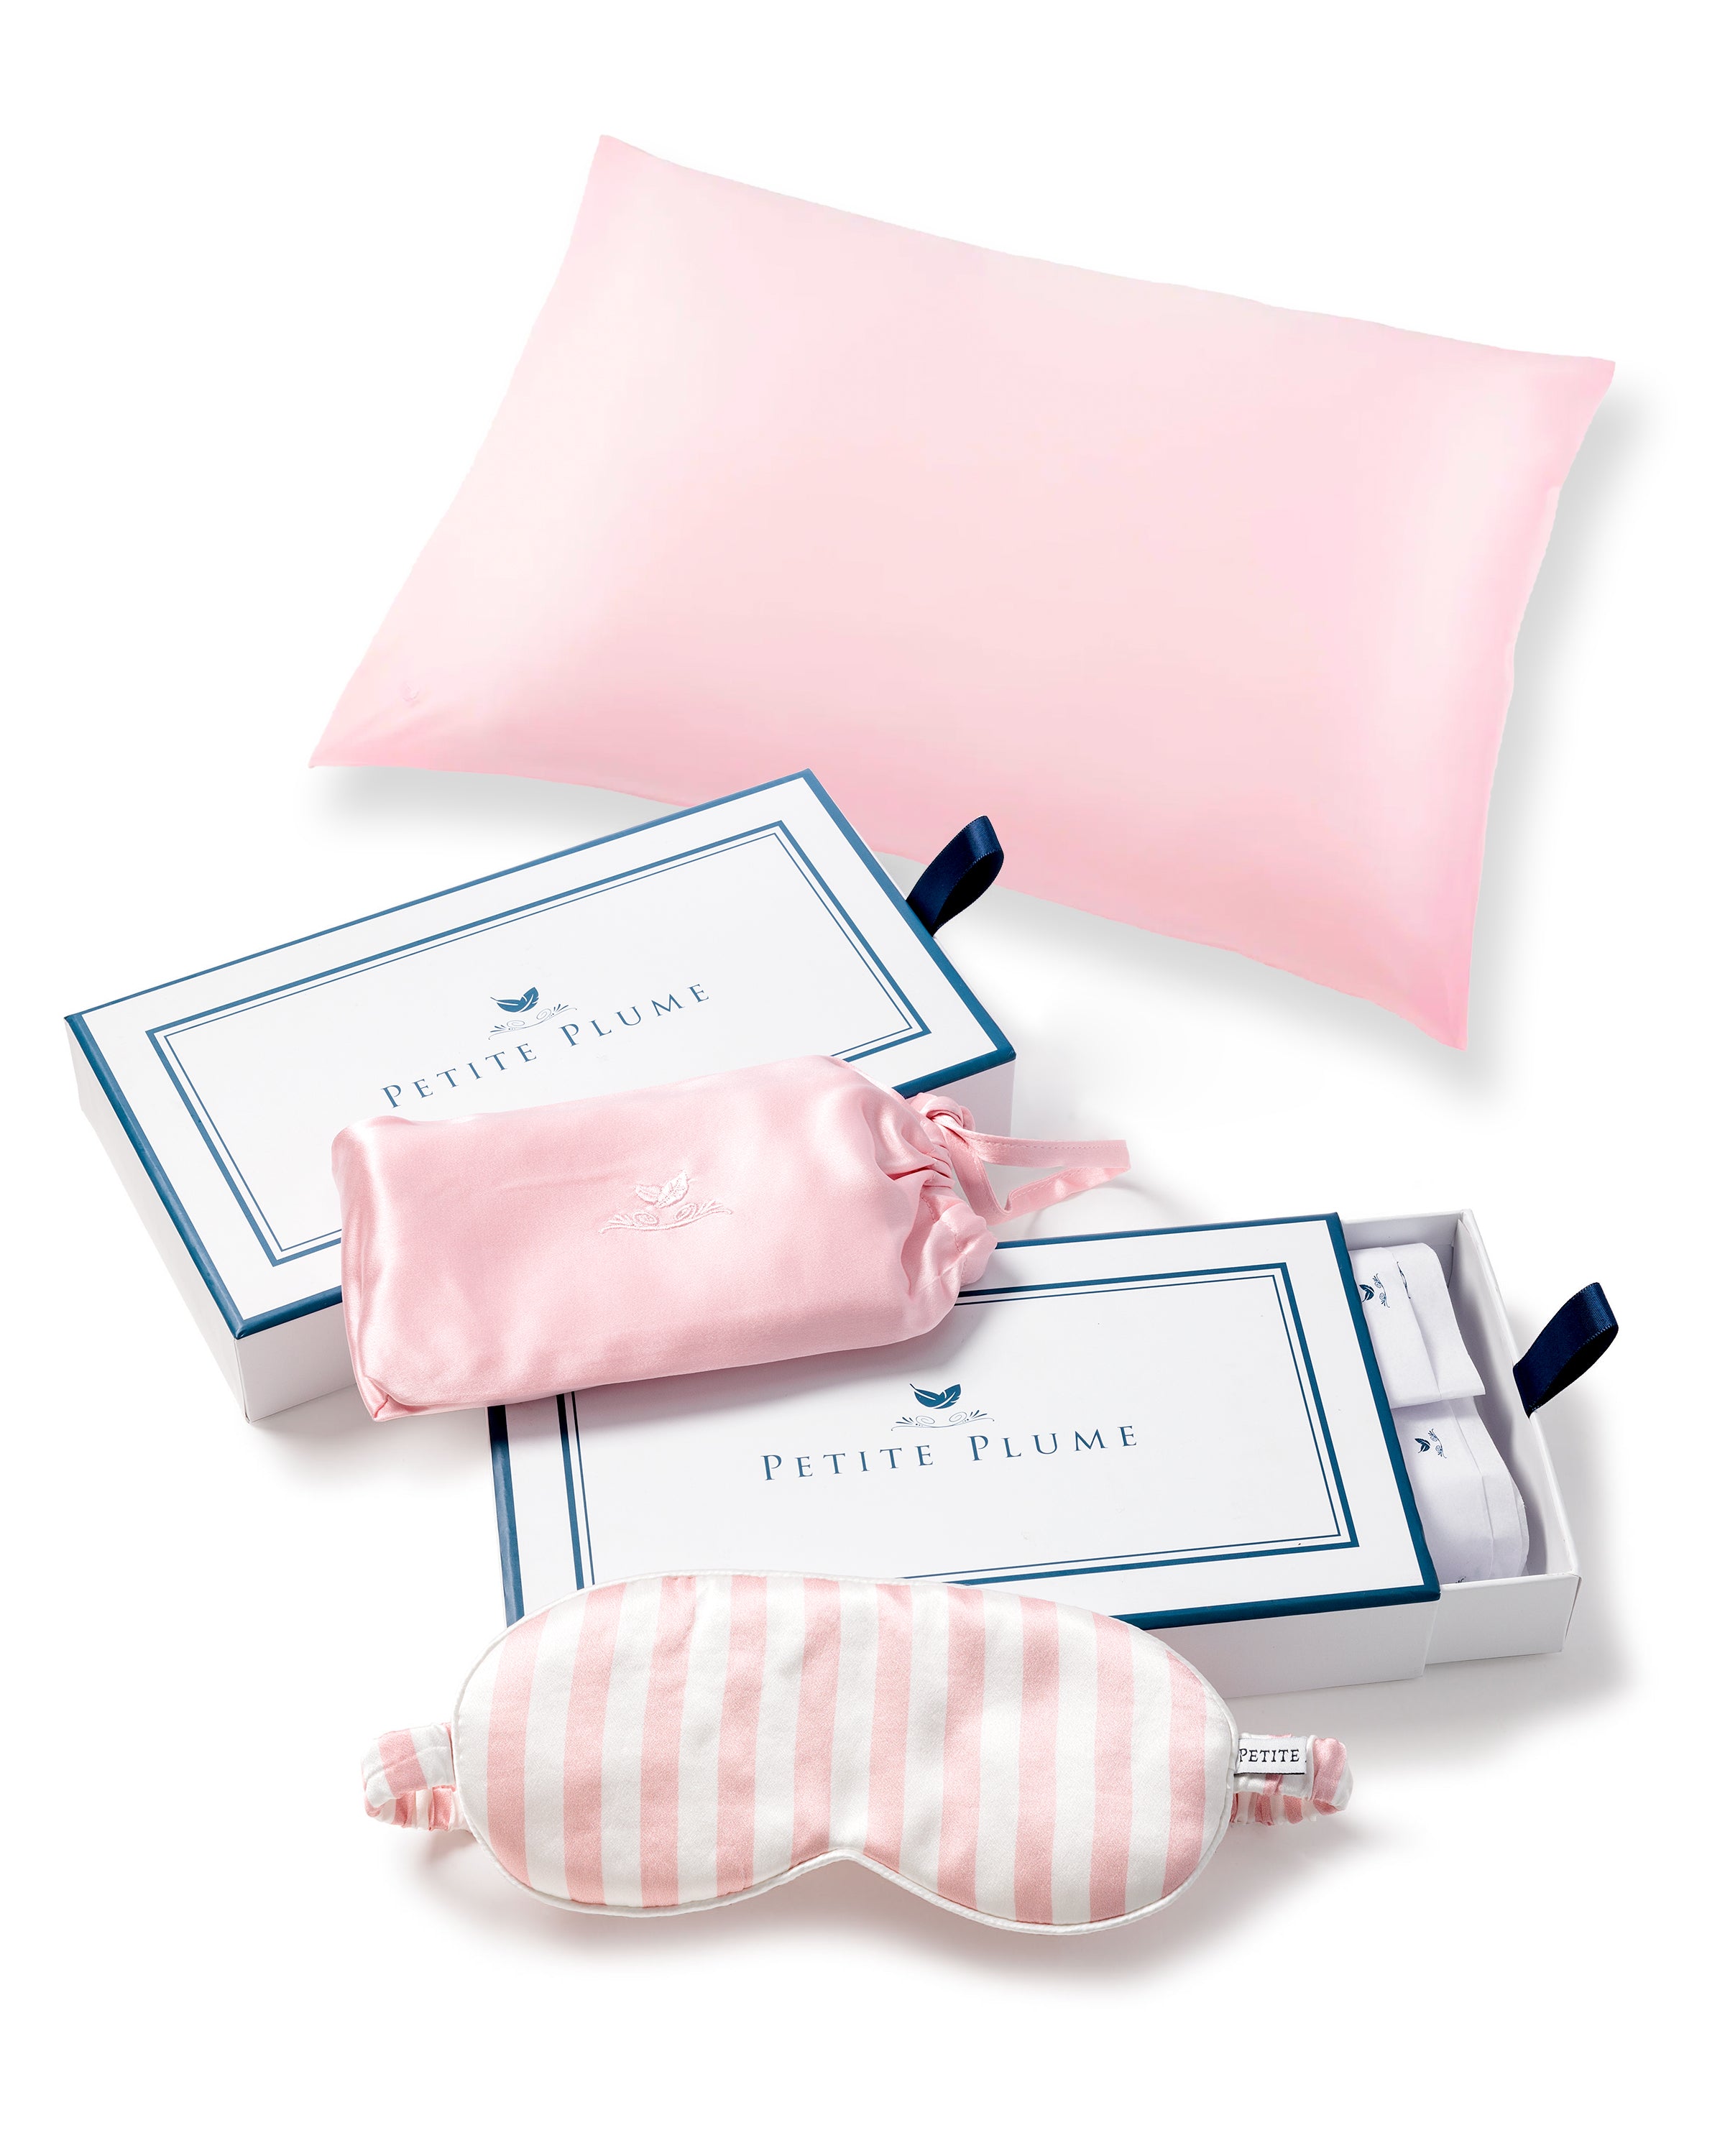 The Silk Slumber Mother's Day Gift Set